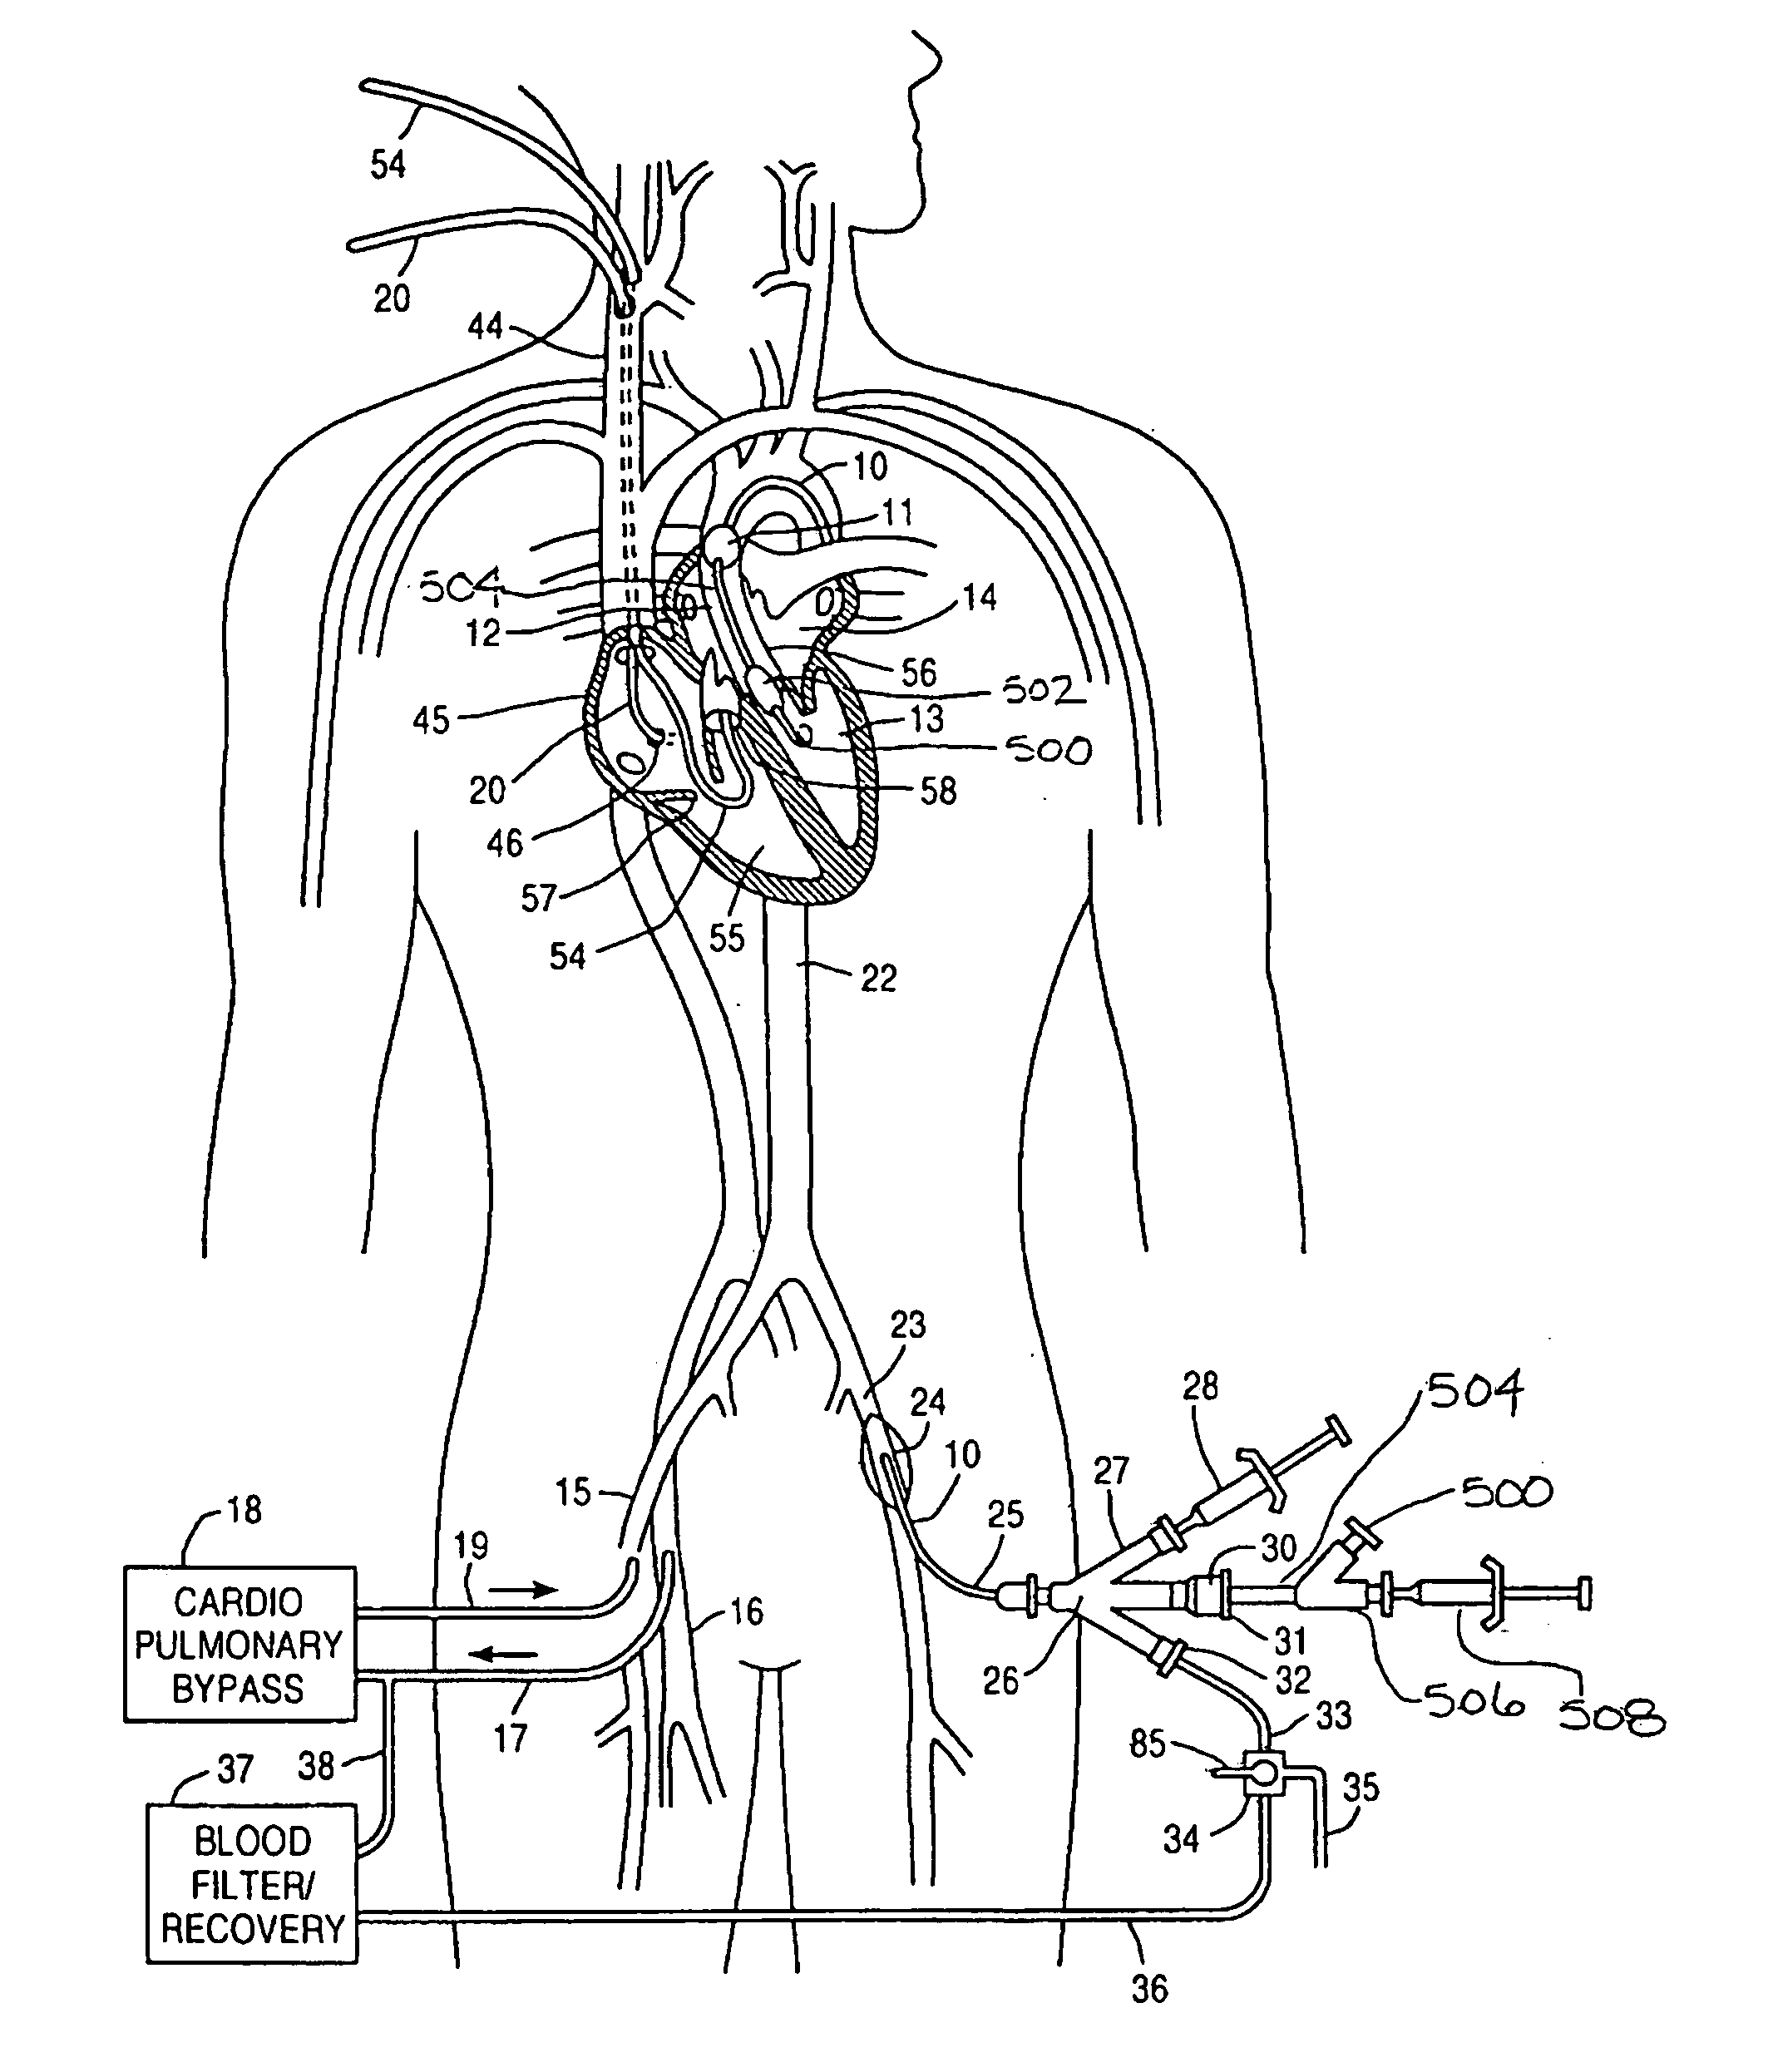 System and methods for performing endovascular procedures